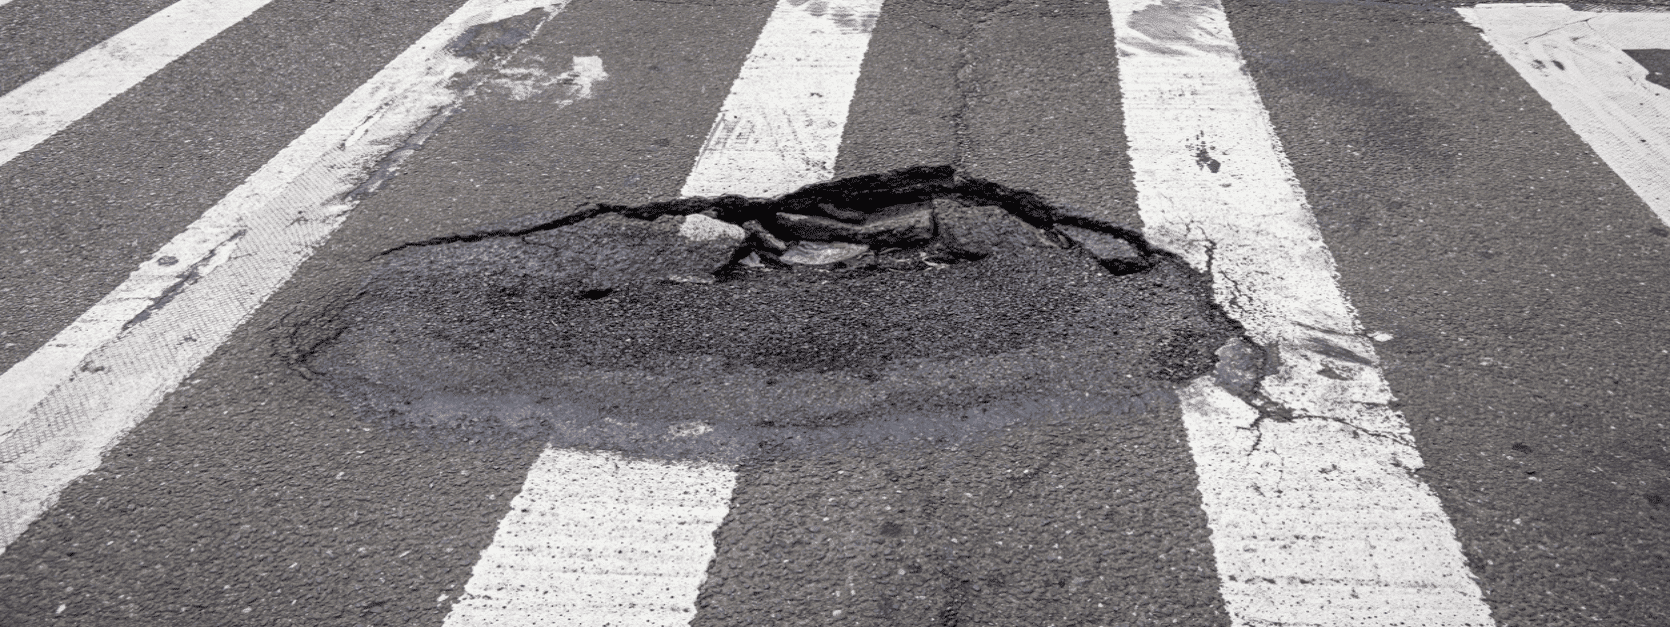 How Does Poor Road Infrastructure Lead to Car Accidents in Queens